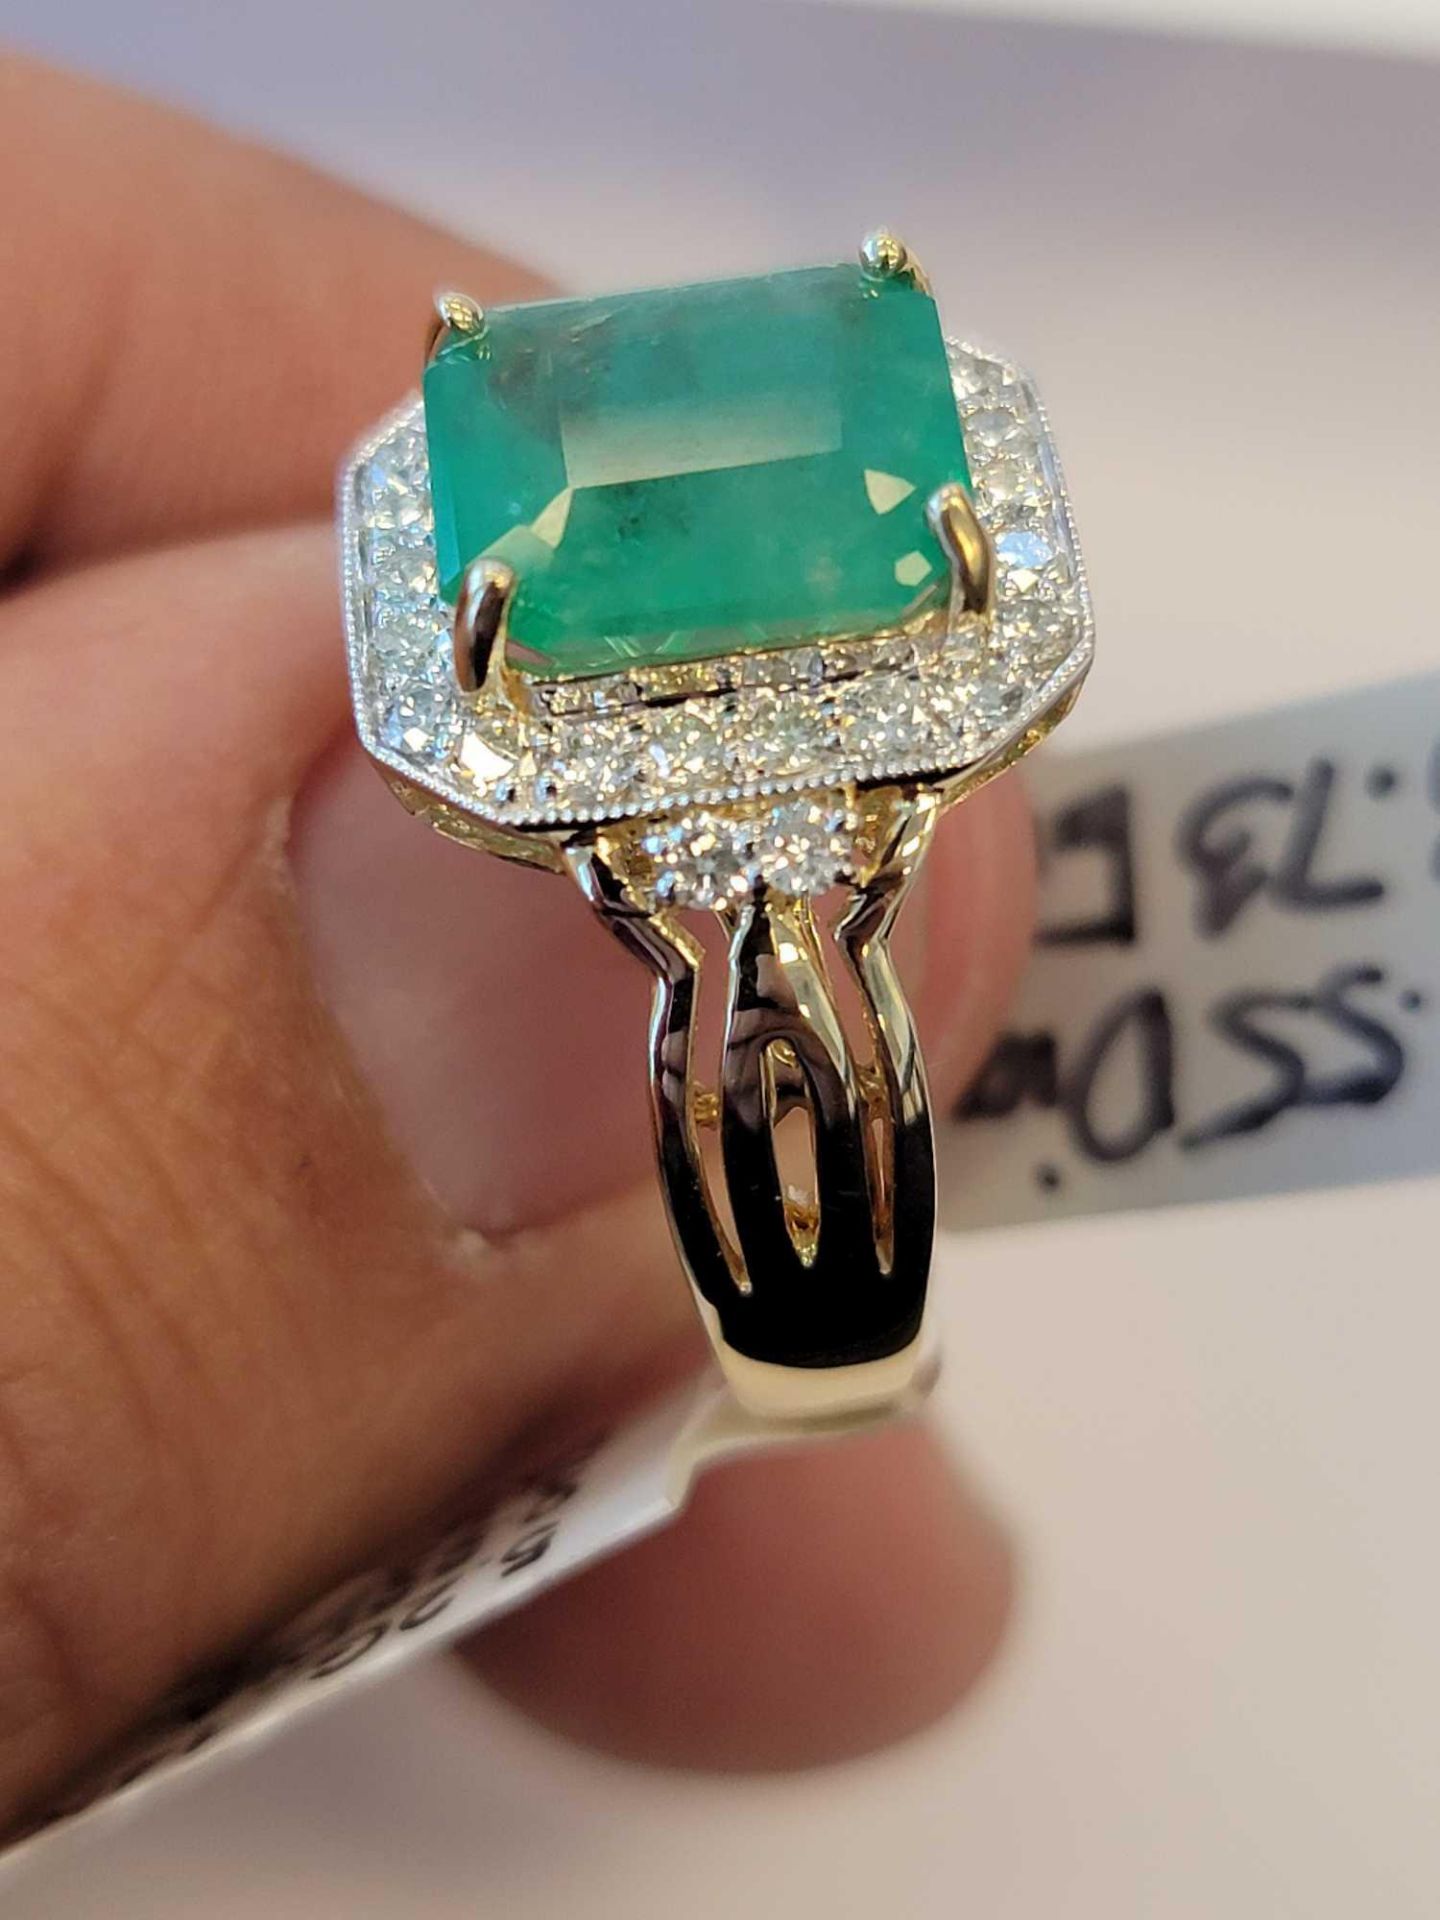 14KT yellow gold diamond and emerald ring - Image 3 of 8